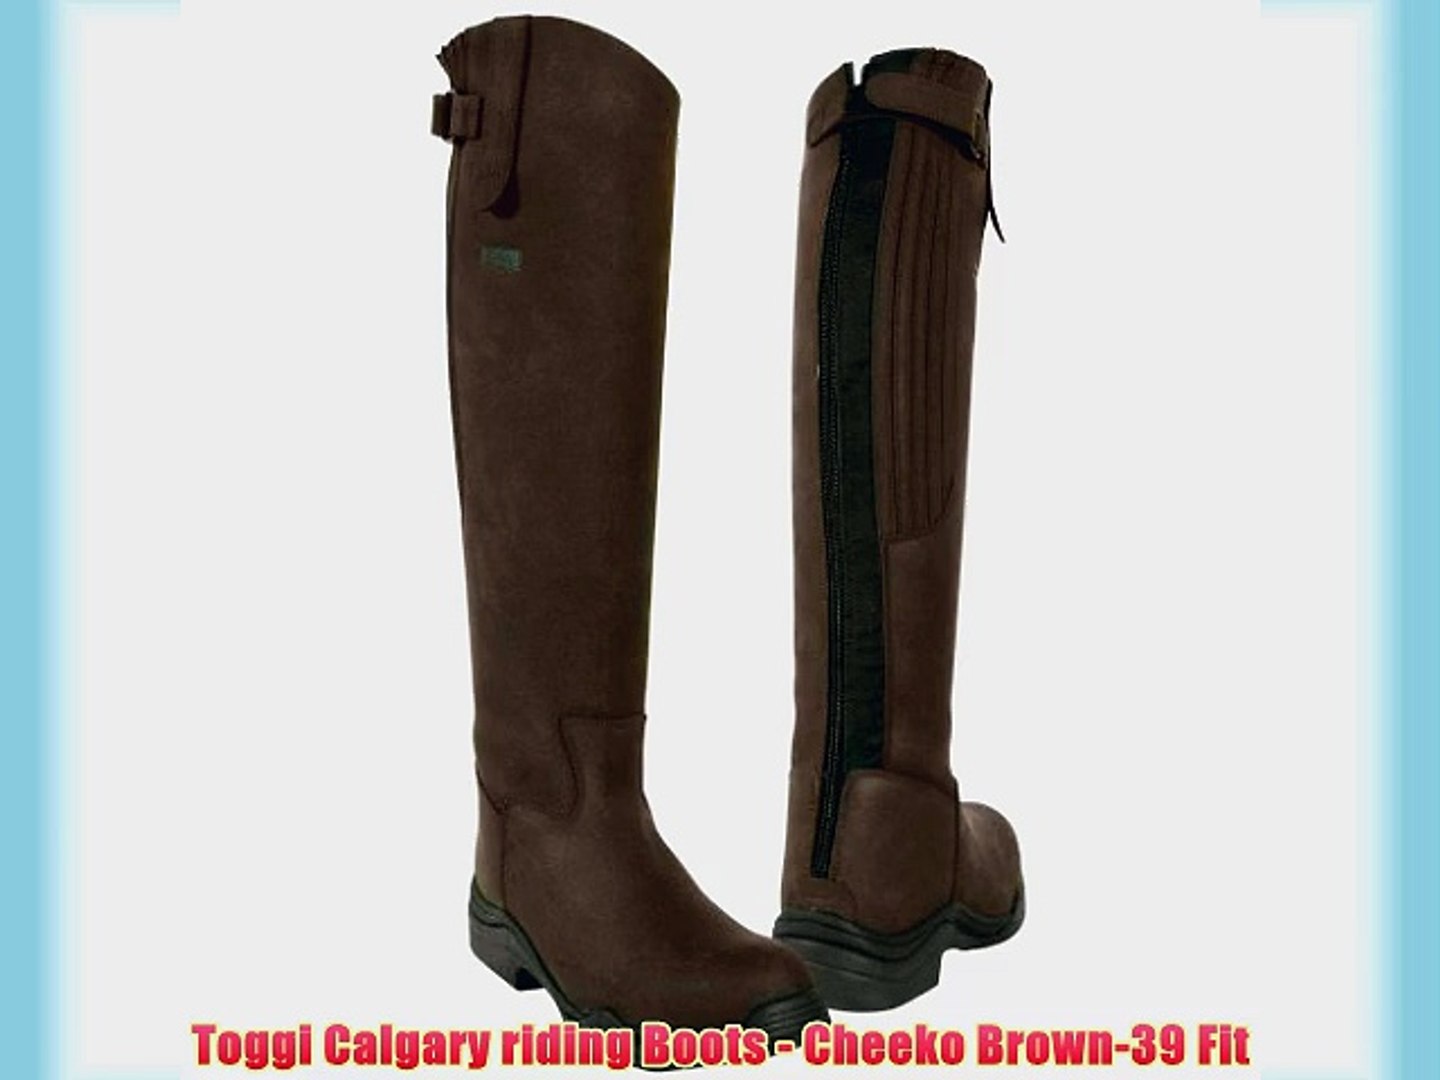 Wide Leg Fitting EU 40 Toggi Calgary Long Leather Riding Boot With Full Zip In Cheeco Brown Size: 6.5